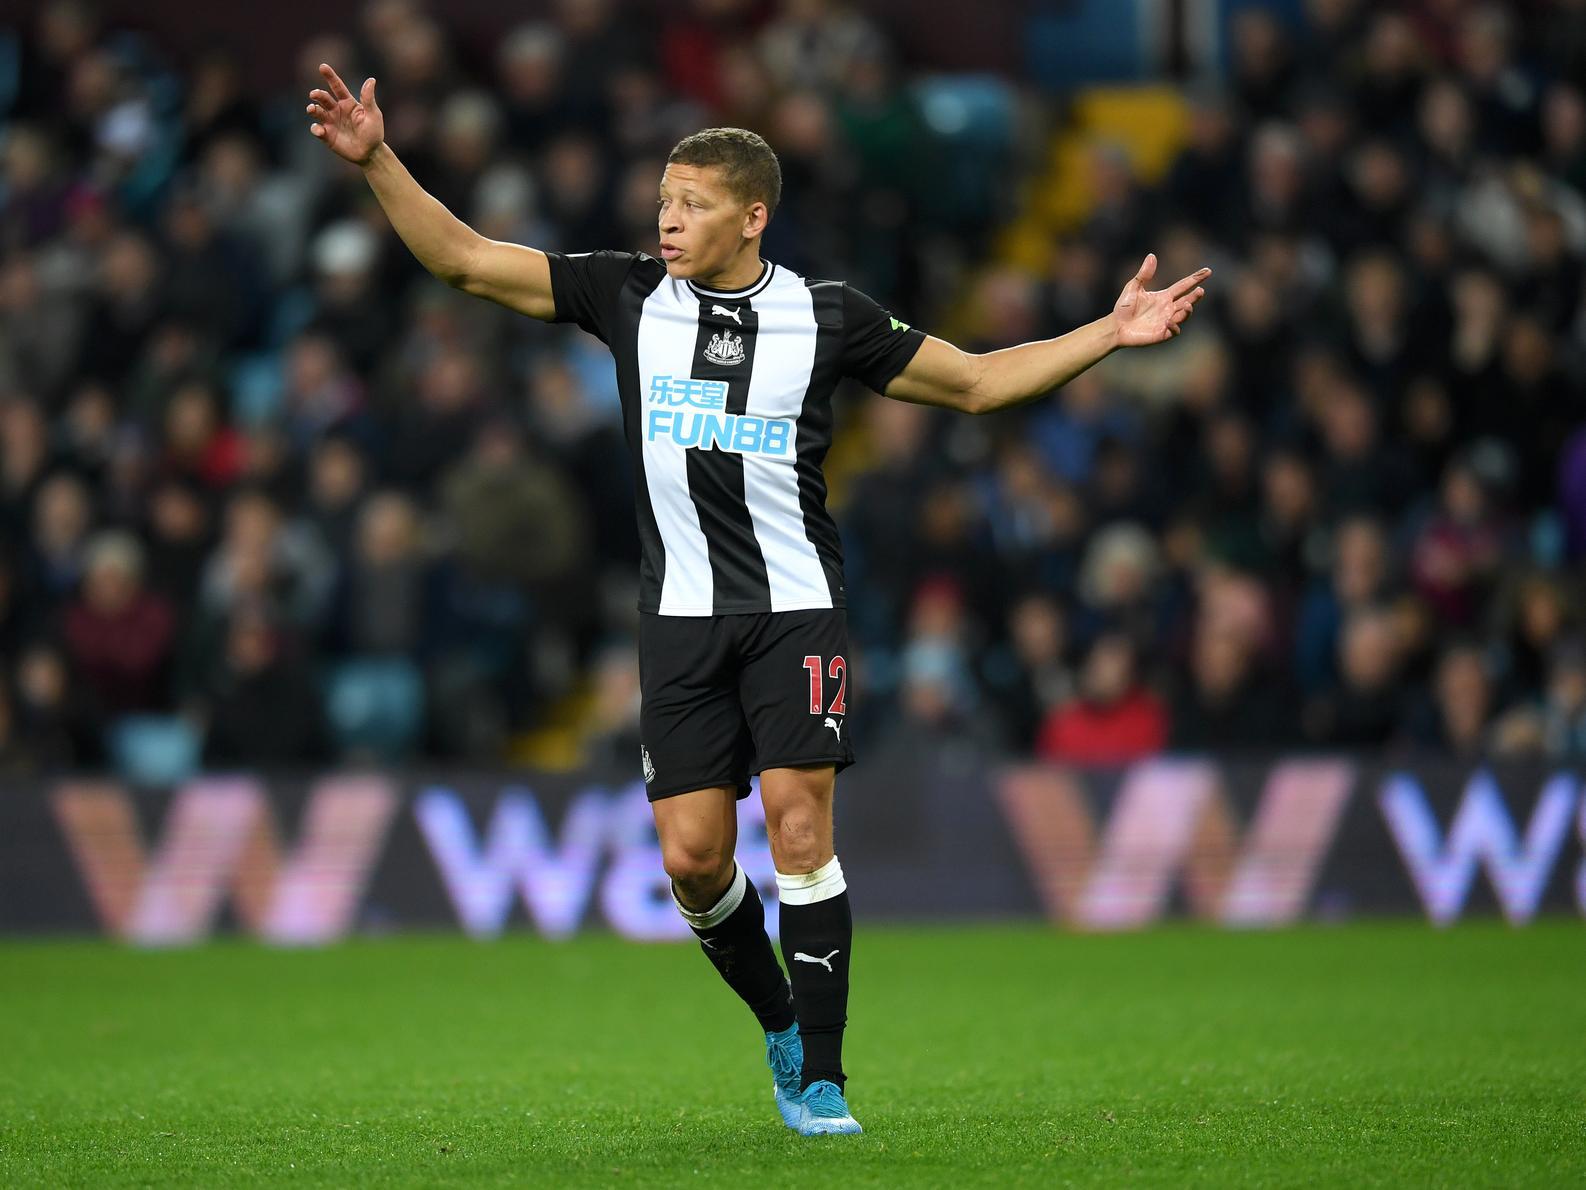 Nottingham Forest are set to go all guns blazing to secure Newcastle United striker Dwight Gayle in January, as they hope to get the Championship goal machine to work his magic again. (Football League World)